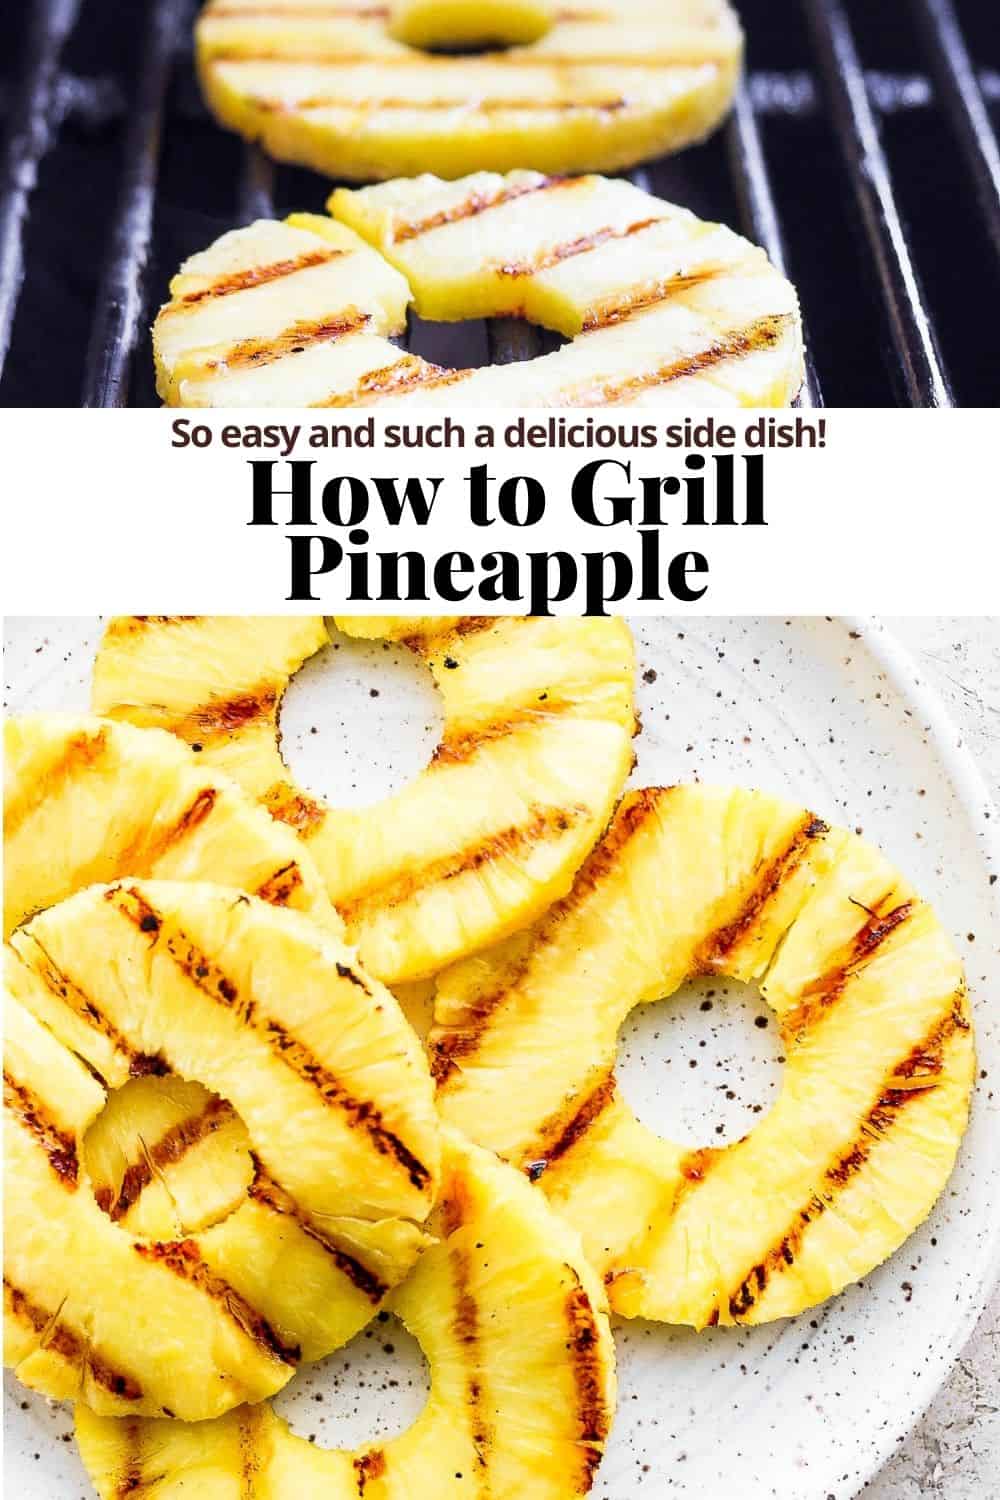 Pinterest image for grilled pineapple.